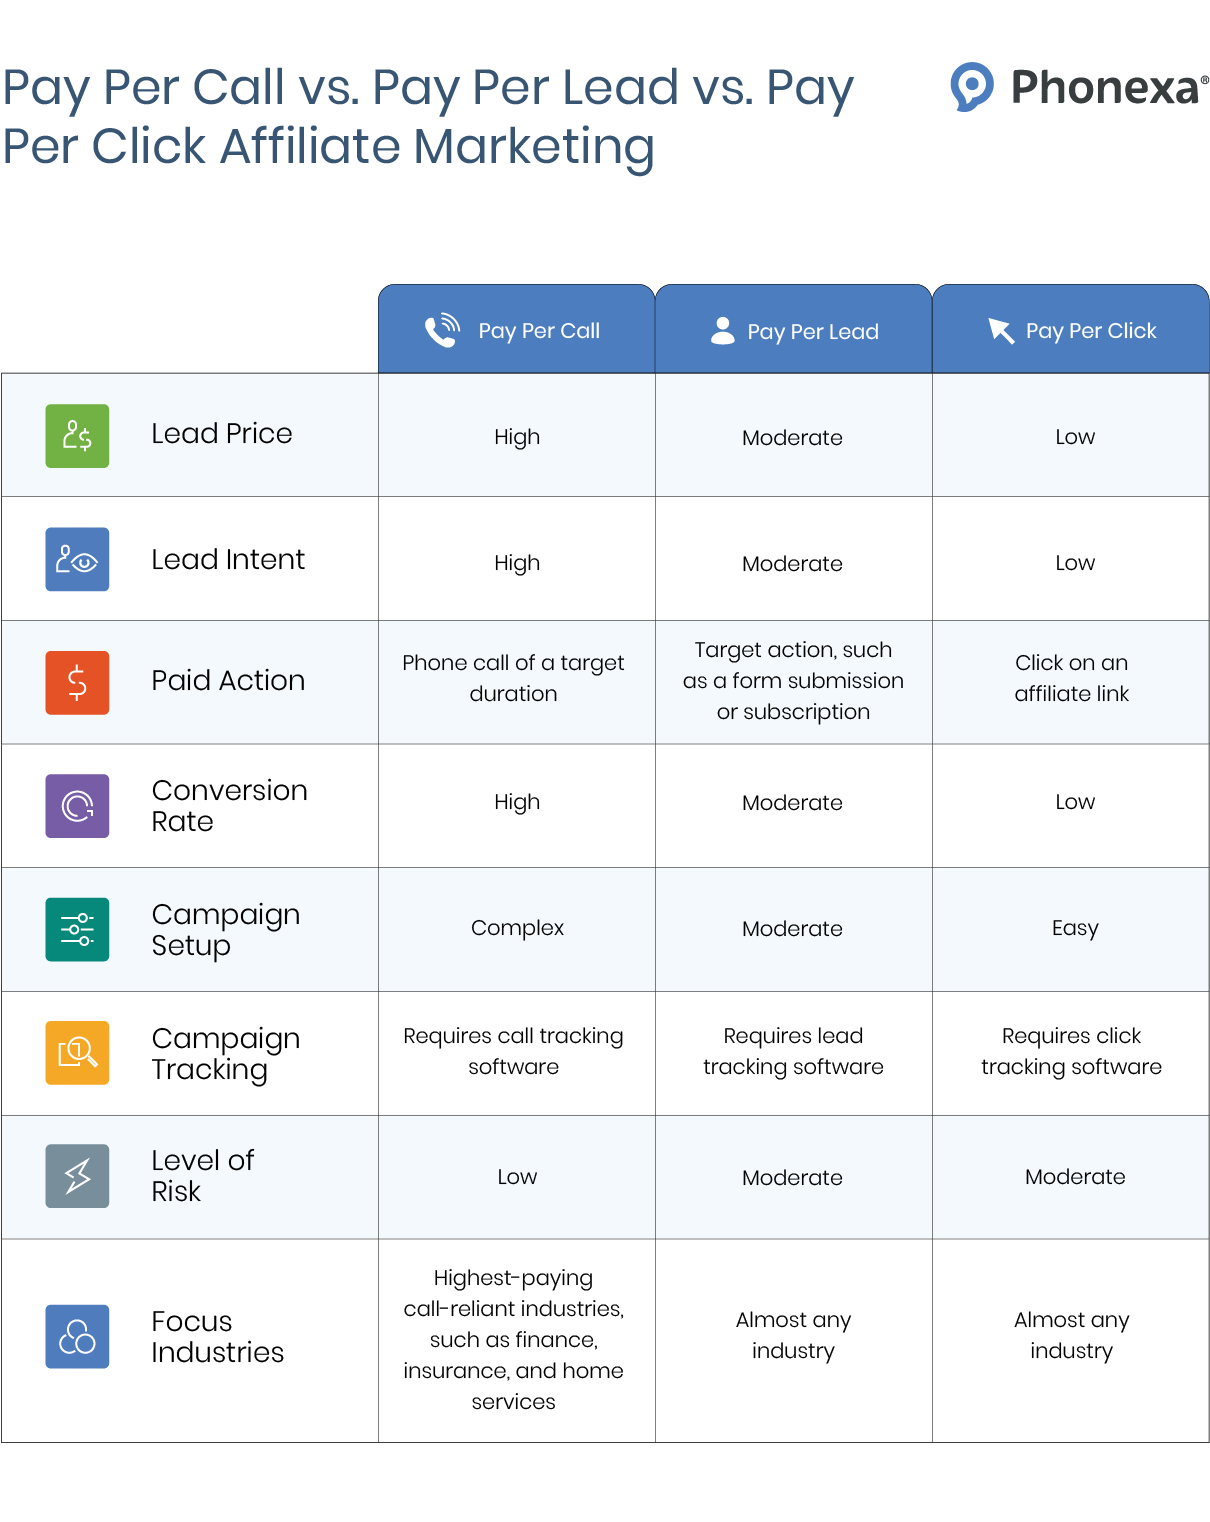 Comparing between pay per call, pay per lead, and pay per click affiliate marketing models by eight factors: lead price, lead intent, paid action, conversion rate, campaign setup, campaign tracking, level of risk, and focus industries